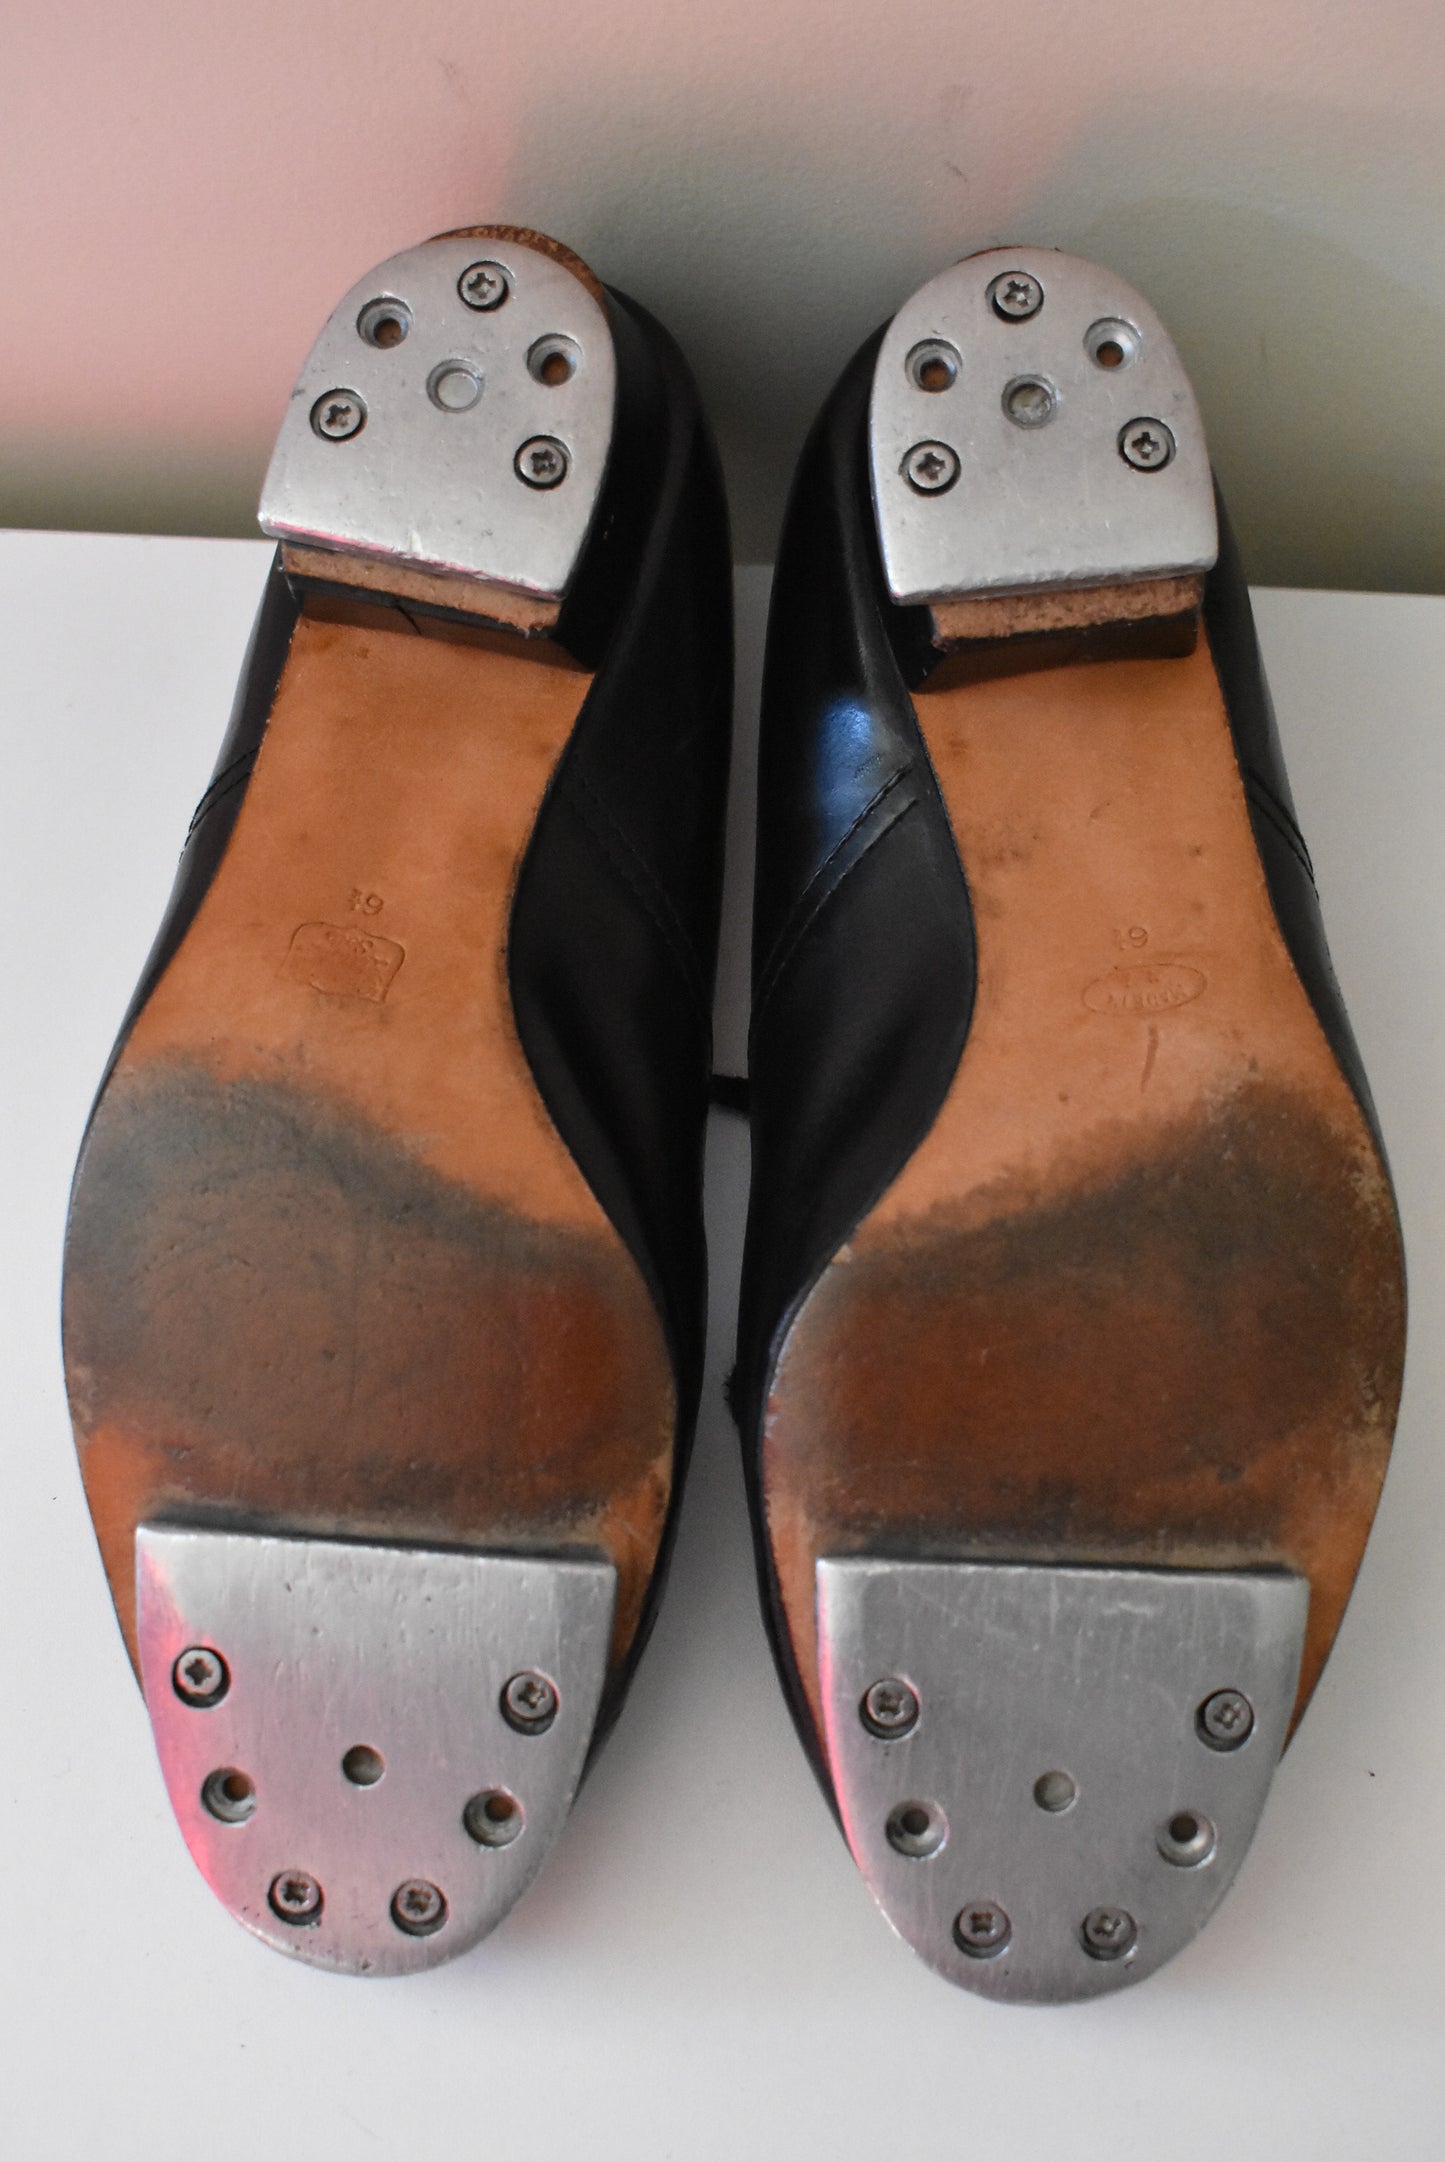 Leather tap shoes, Size 6 1/2